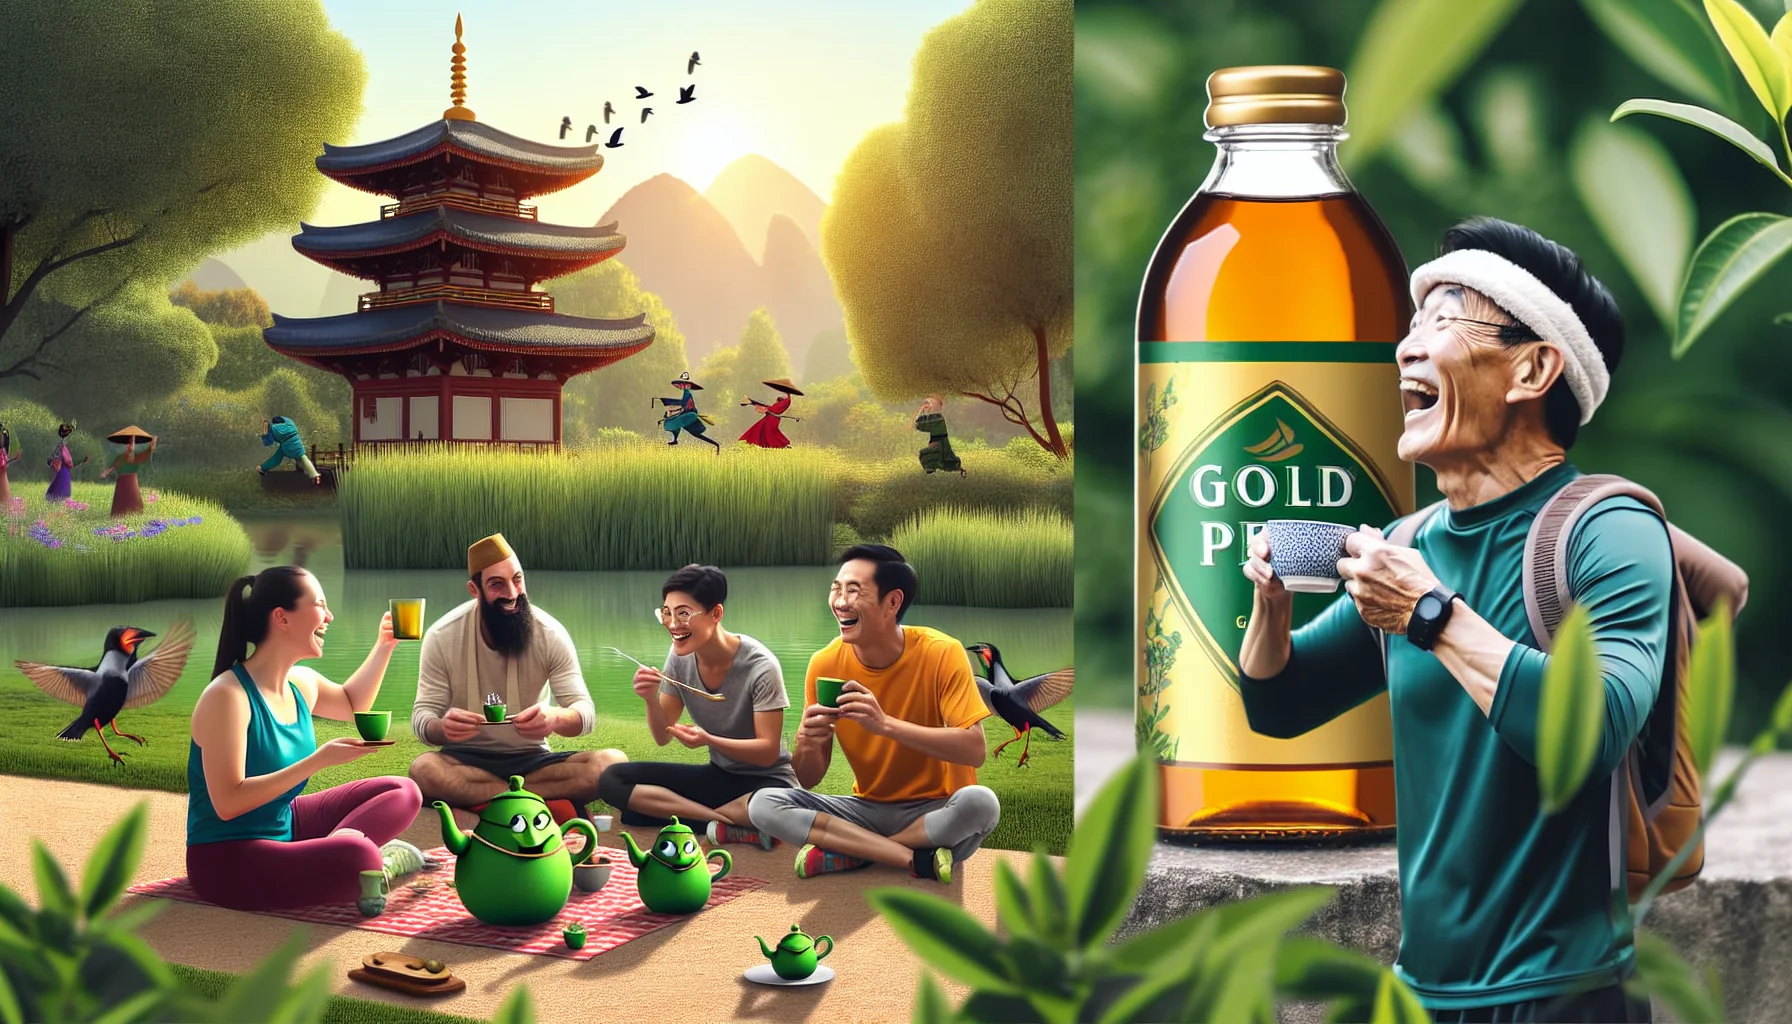 Create an engaging and humorous scenario with a bottle of Green Tea. The scene is set in a lively park on a warm and sunny day. A group of tea leaves are having a picnic near a pond, happily sipping from tiny cups. Next to them, a bottle of gold peak green tea is being opened by an athletic Caucasian woman who just finished her jog and looks amused looking at the scenario of these animated tea leaves. Her Asian male friend, a bird-watcher, is chuckling while looking through his binoculars at this strange yet entertaining scenario.